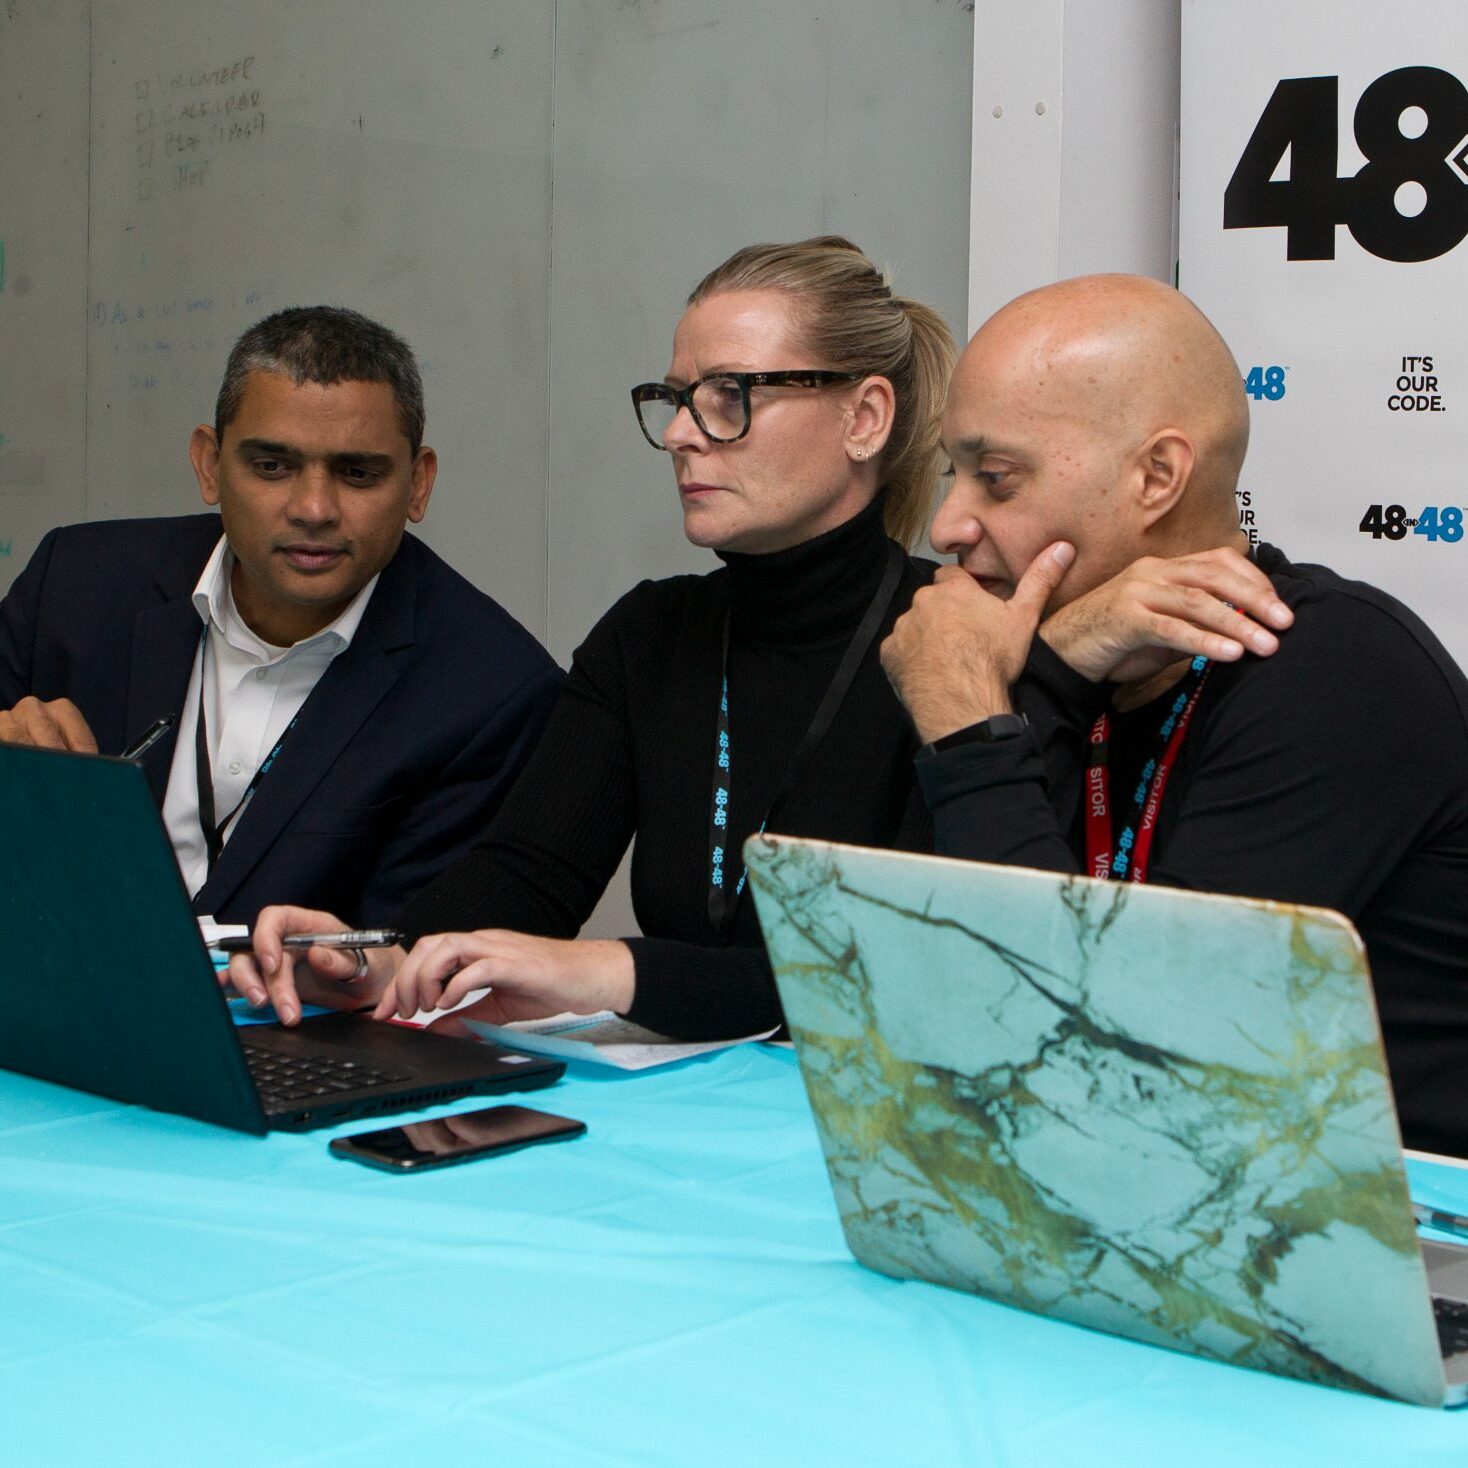 LONDON, UNITED KINGDOM - NOVEMBER 4:  Sumanth Rao (L), serving as a judge on behalf of Delta, pictured with fellow judges Andrea Moore (C) from Red Badger, and Girish Parekh (R), from Cisco, during the 48in48 event, sponsored by Delta, in London, UK, on November 4, 2018. 48in48 is an event which seeks to help 48 non-profit companies better serve their communities with 48 websites, all in 48 hours, and all with the help of volunteers.